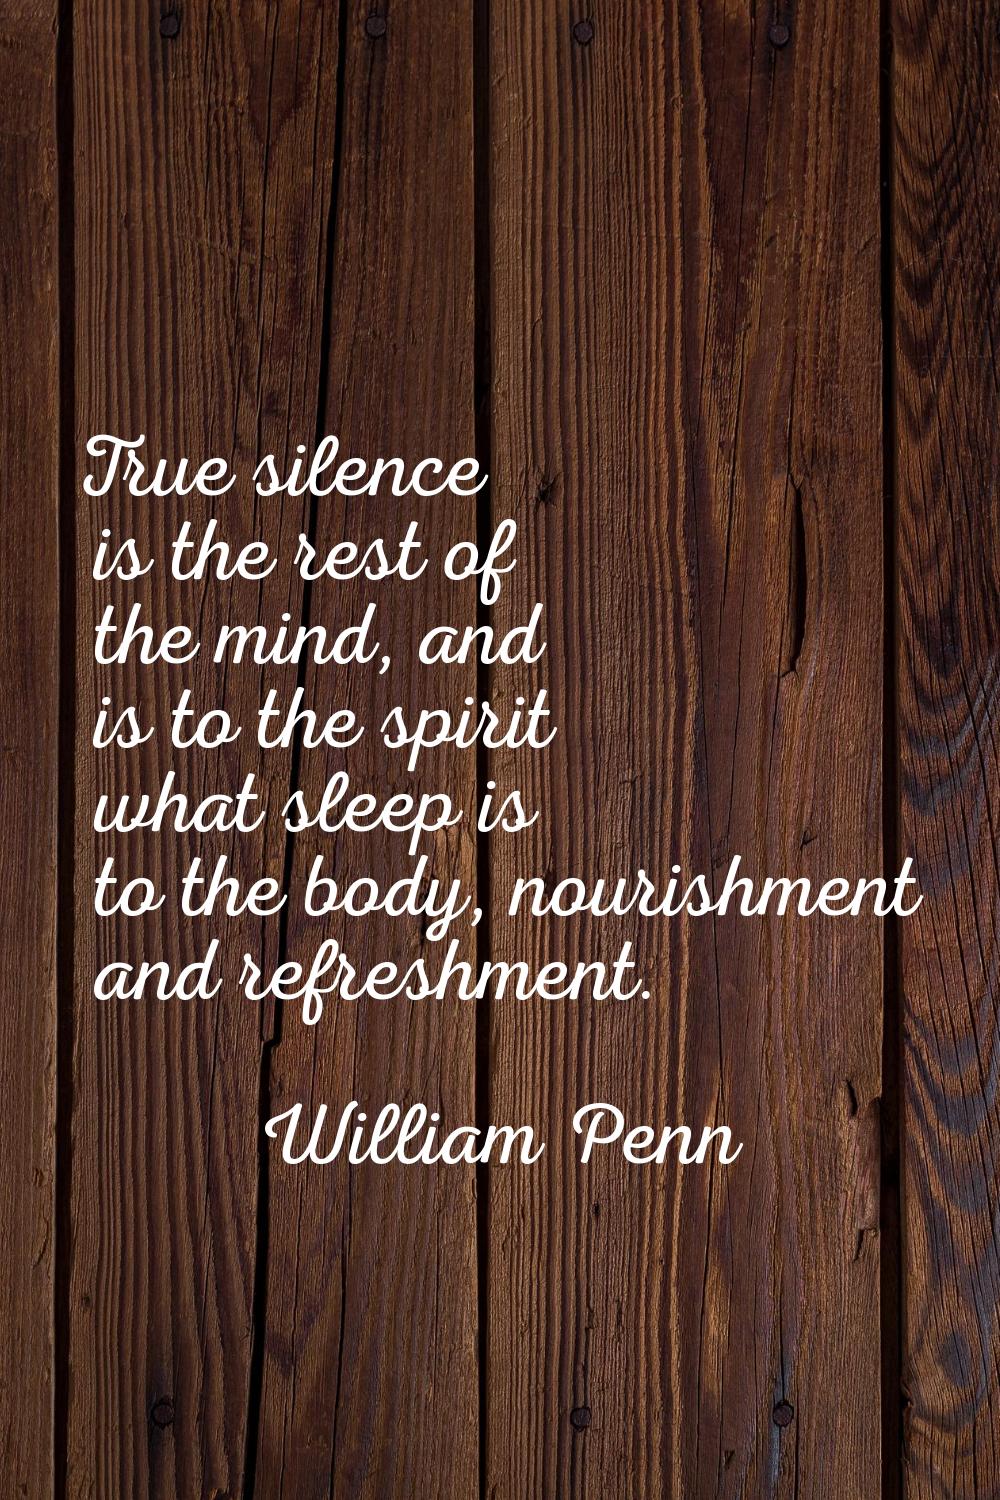 True silence is the rest of the mind, and is to the spirit what sleep is to the body, nourishment a